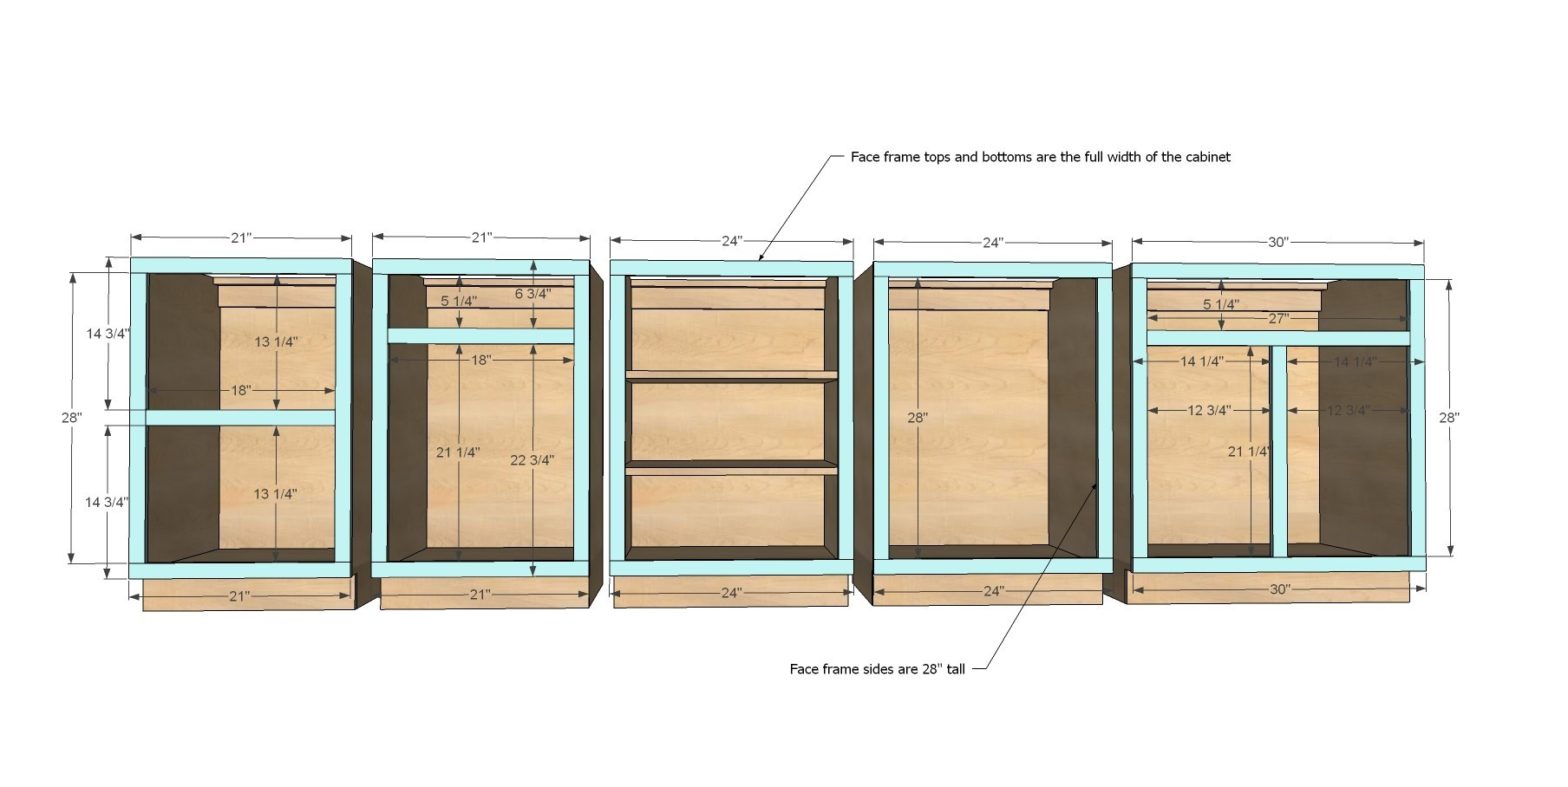 How To Build A Kitchen Cabinet The Kitchen Blog